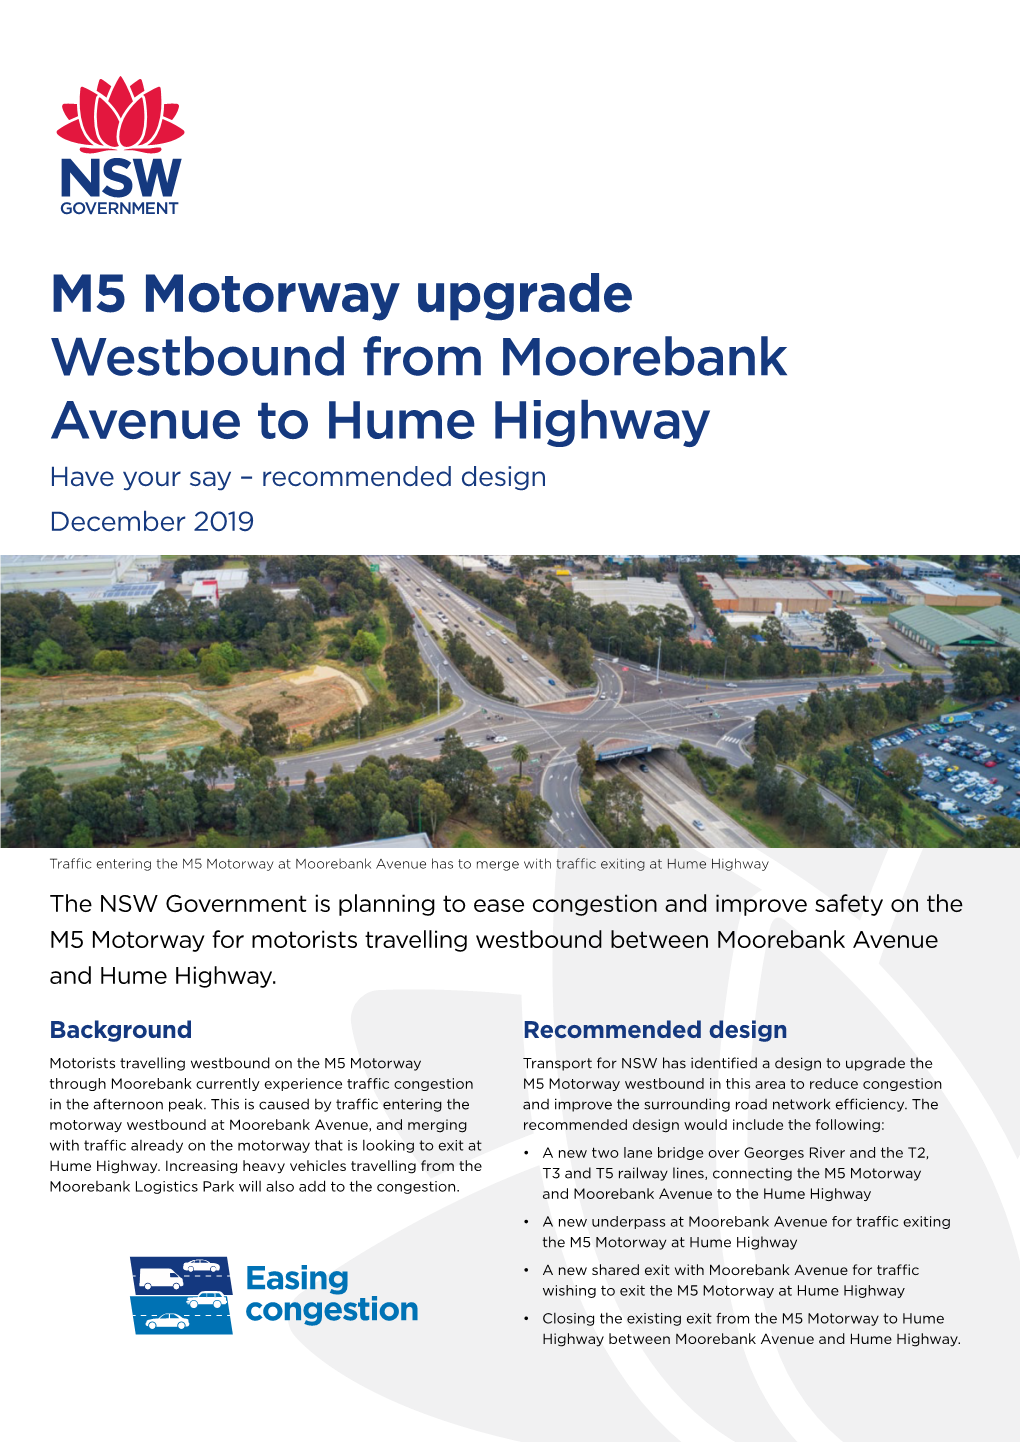 M5 Motorway Upgrade Westbound from Moorebank Avenue to Hume Highway Have Your Say – Recommended Design December 2019